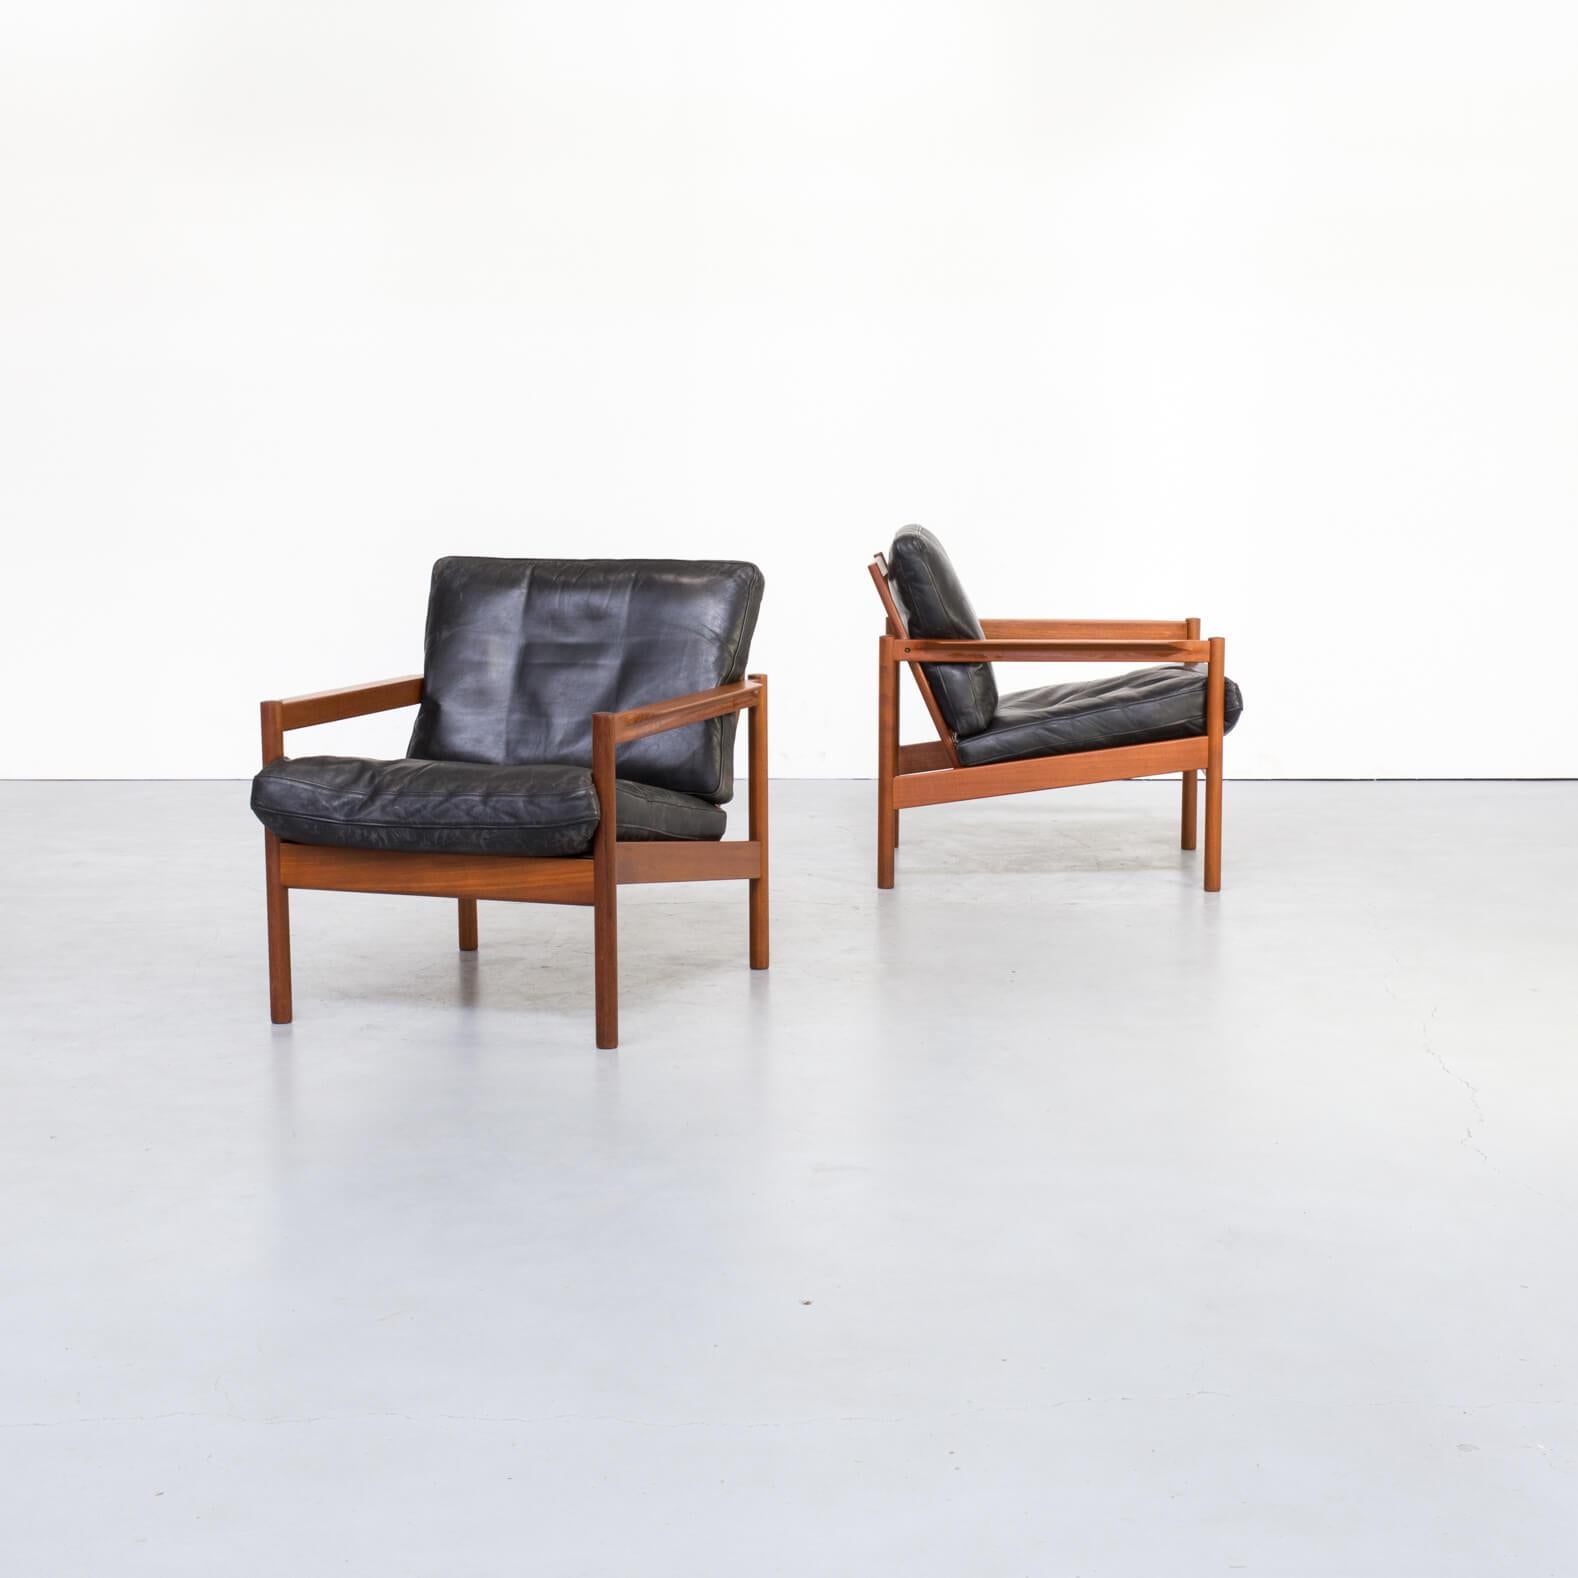 One set of two beautiful KK161 lounge fauteuils for Magnus Olesen designed by Kai Kristiansen in the 1960s. Black leather, on teak wooden frame.